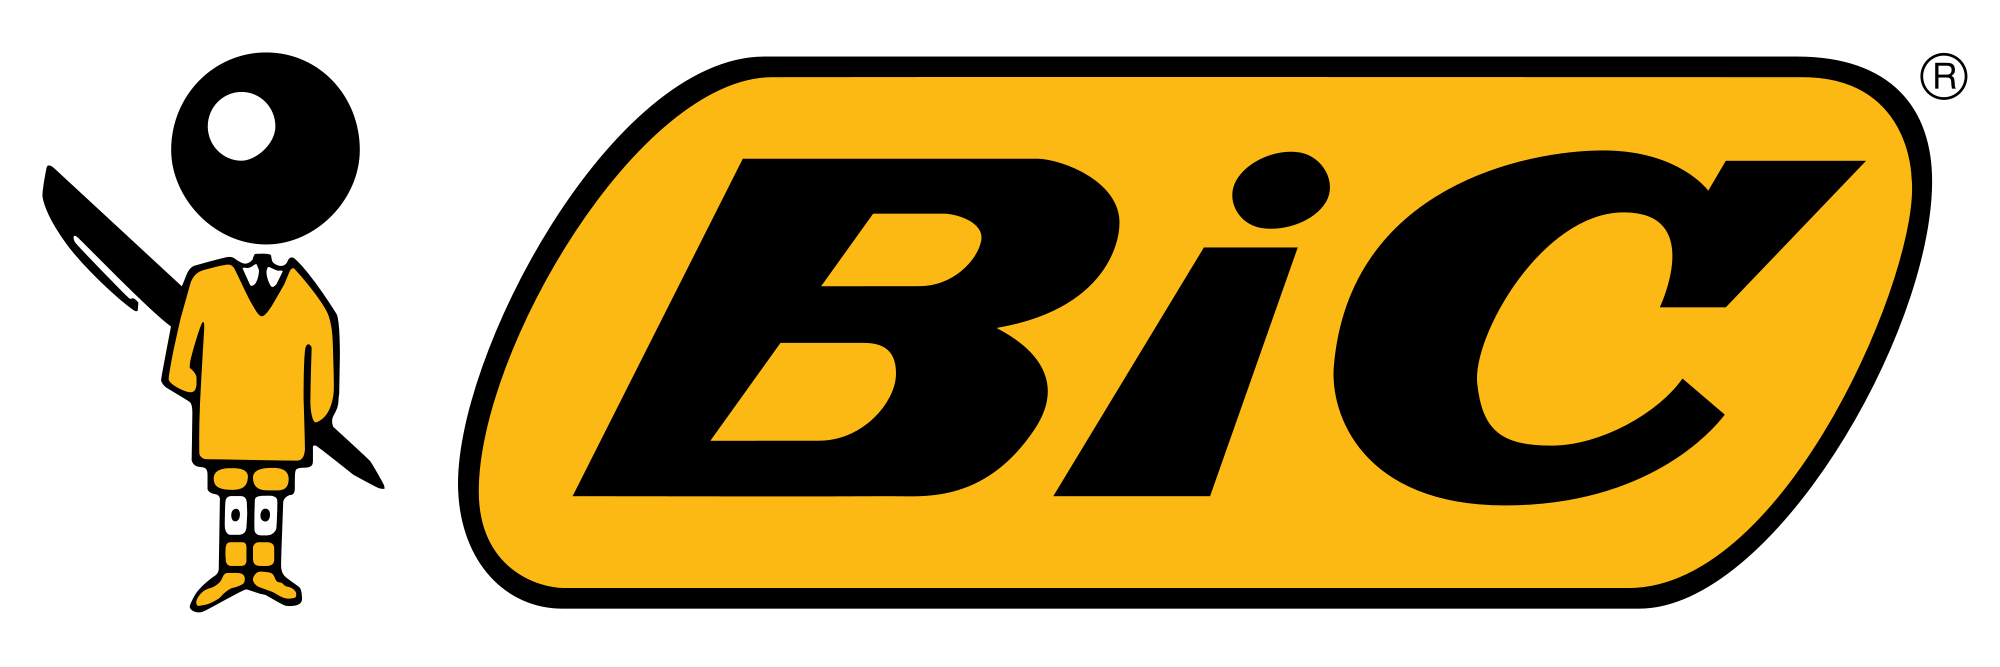 Yellow B Logo - Logos beginning with the letter B - The Logo Company